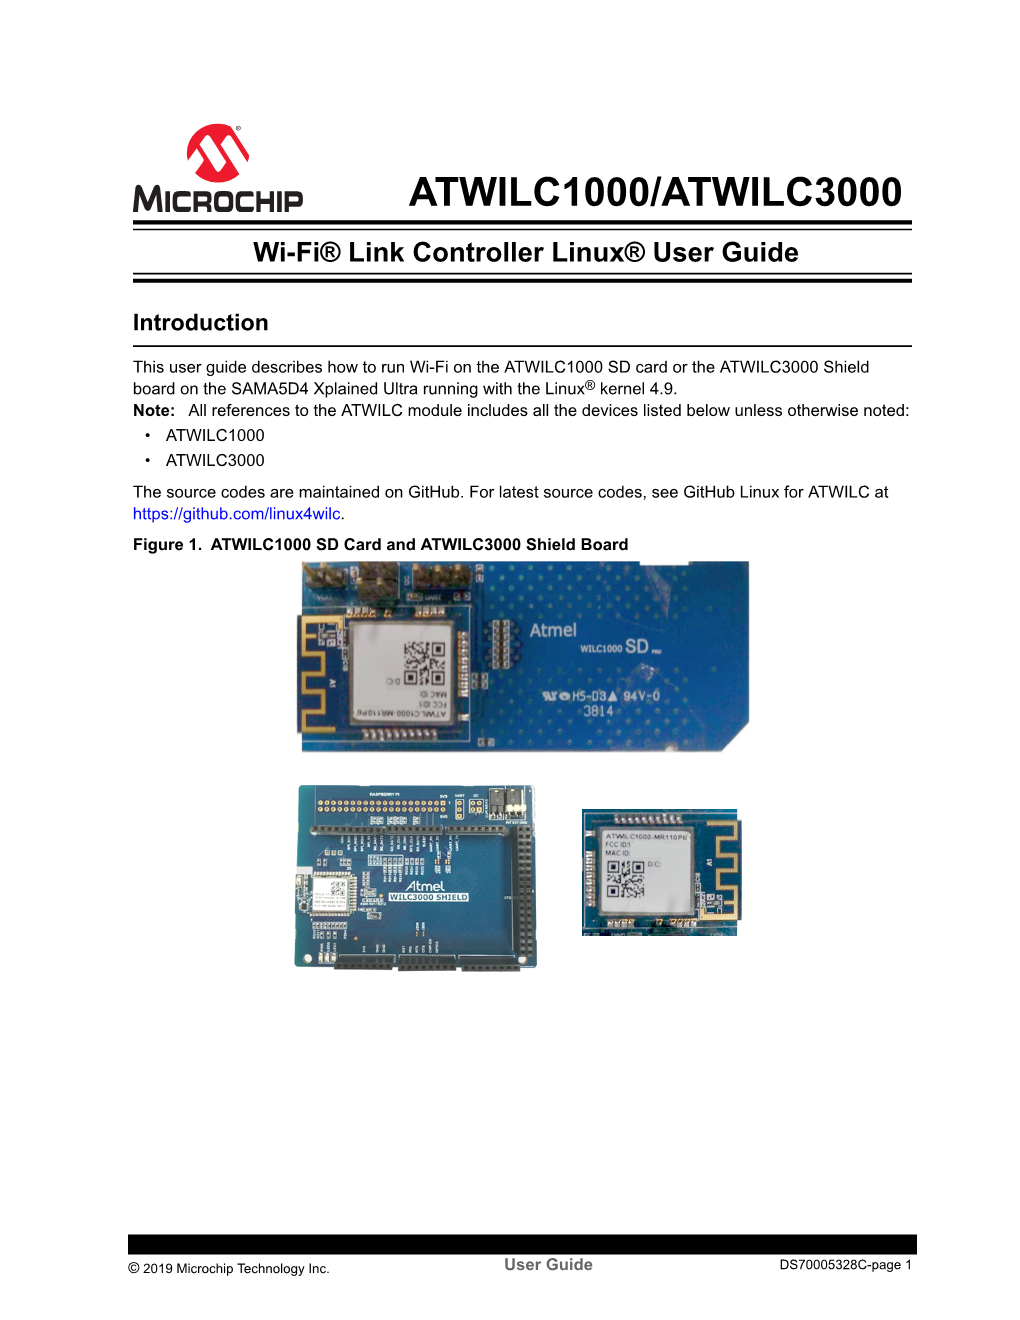 ATWILC1000/ATWILC 3000 Wi-Fi Link Controller Linux User Guide